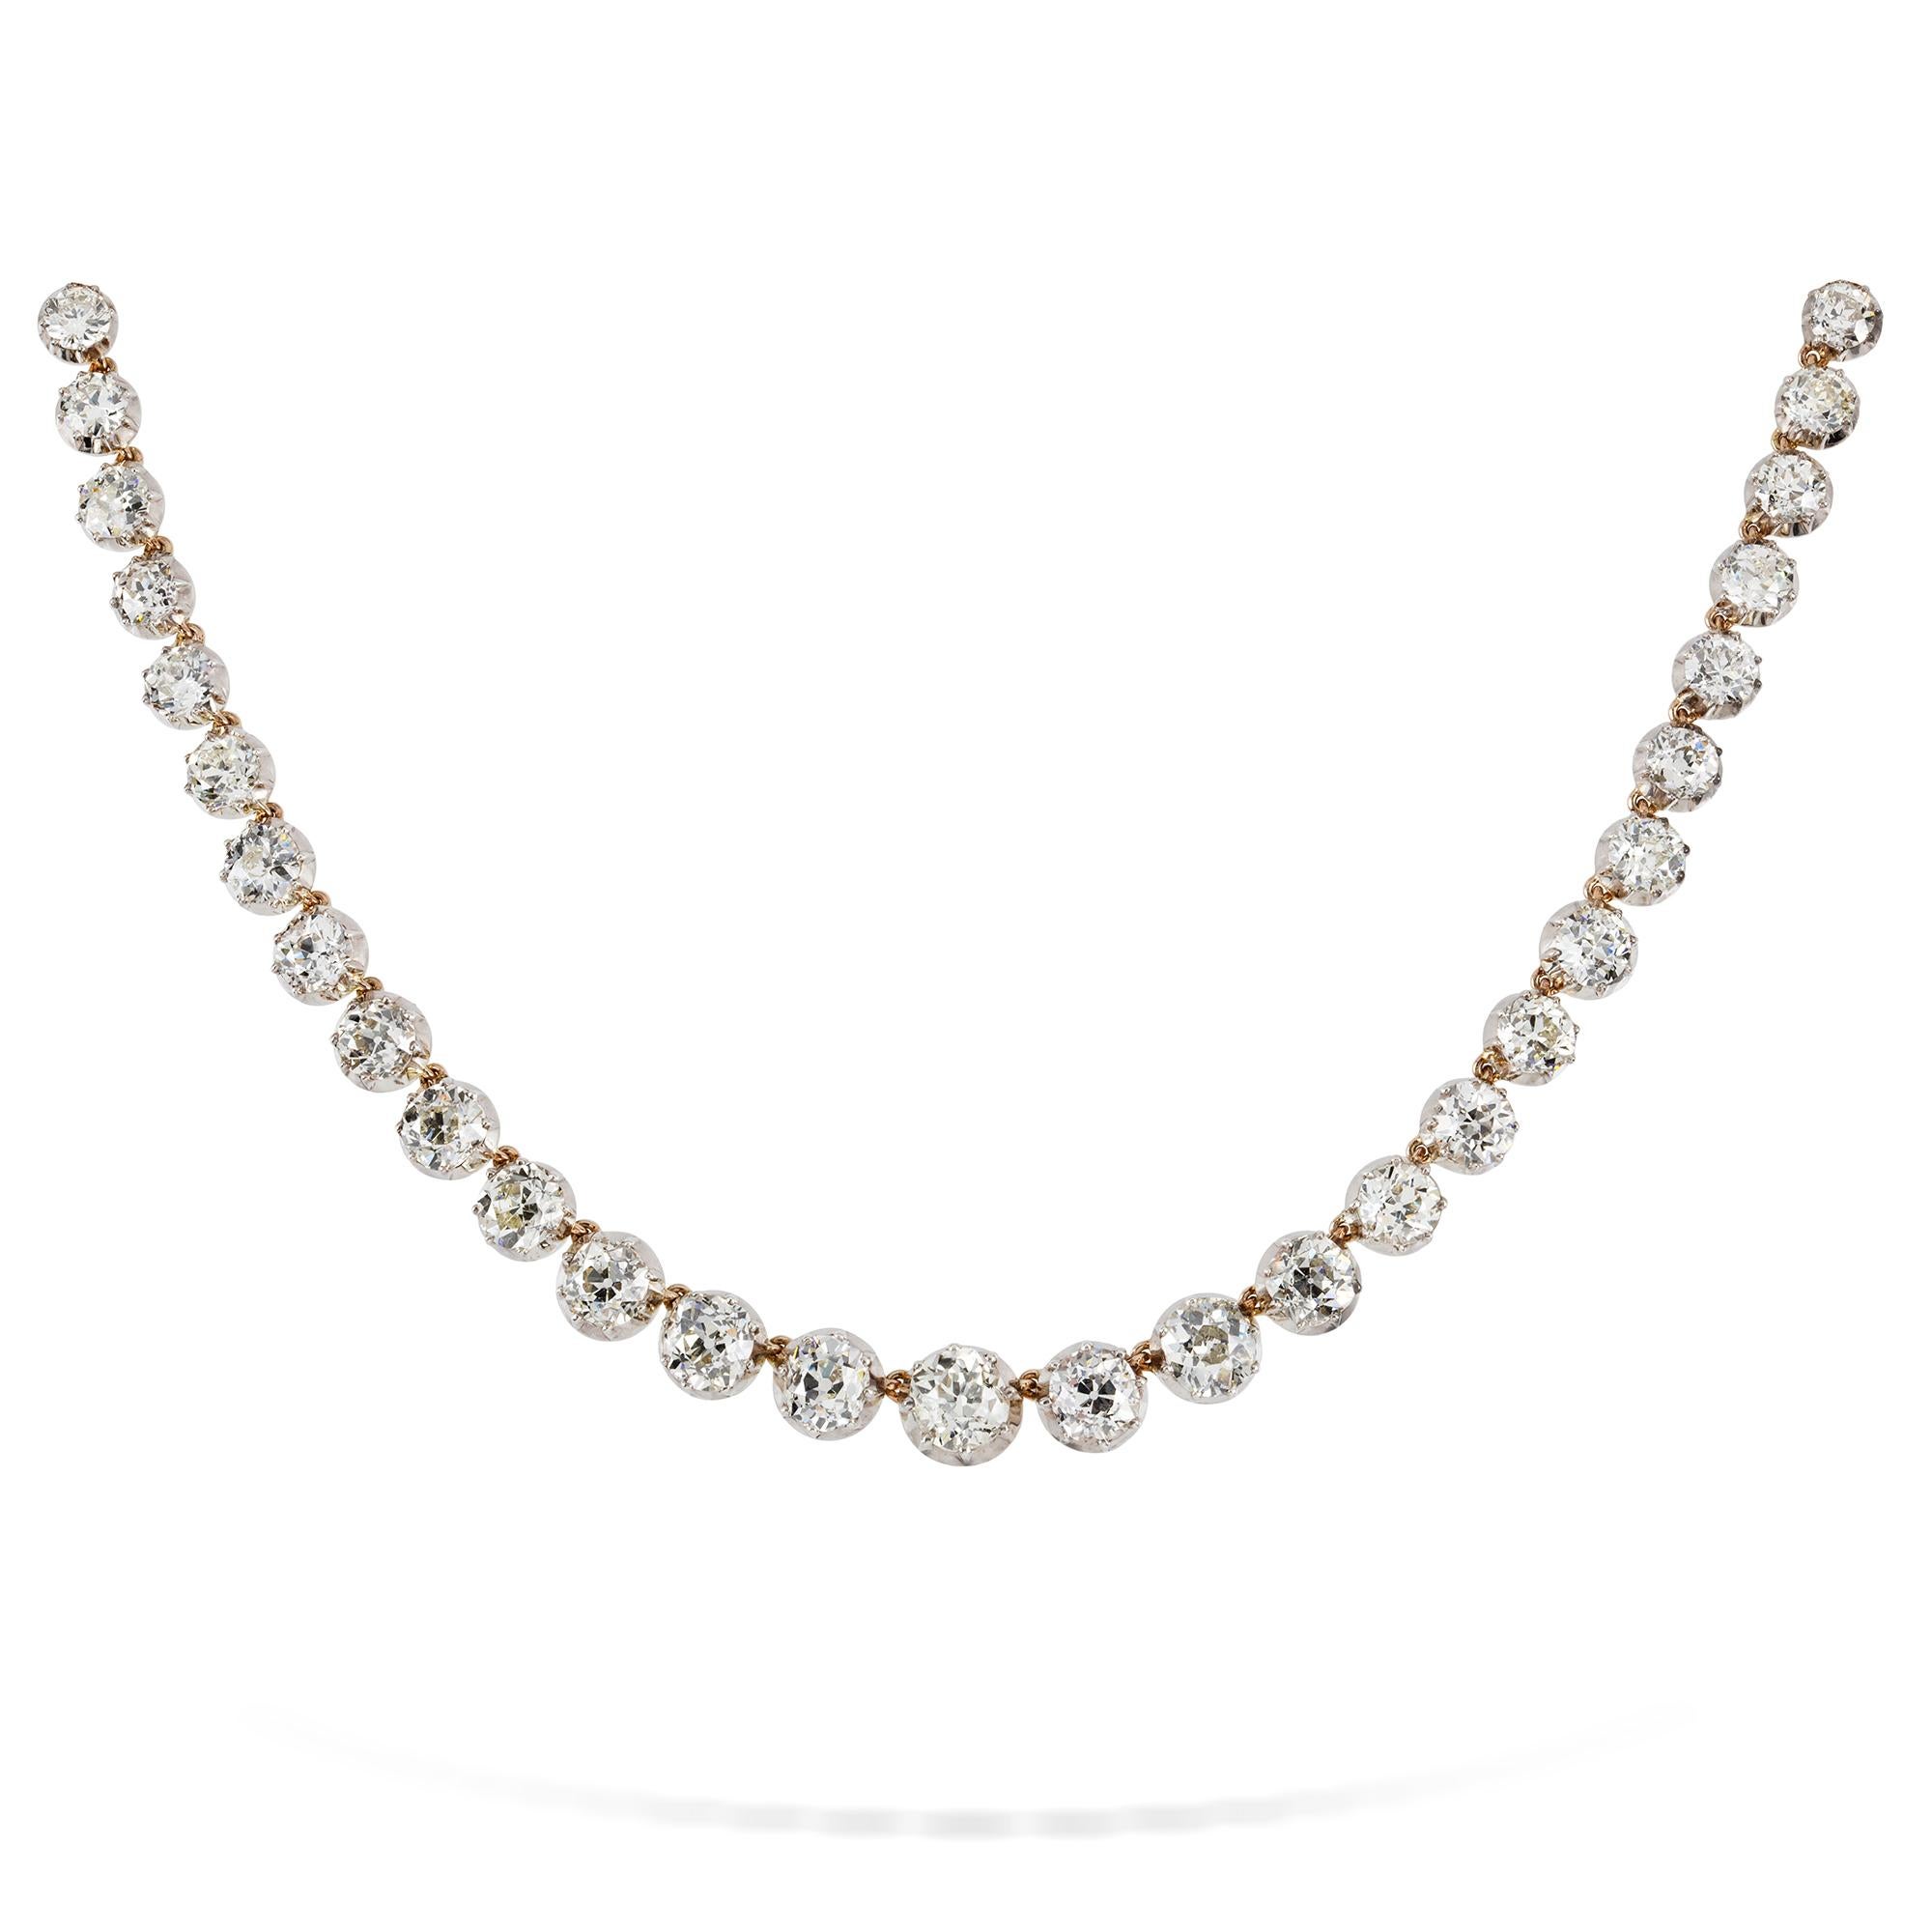 A diamond Riviere necklace, consisting of fifty-six graduated old brilliant-cut diamonds ranging from 0.3 to 2 carats, weighing a total of 34.5 carats, all cut-down set in silver to an 18ct yellow gold mount, with old brilliant-cut diamond-set clasp